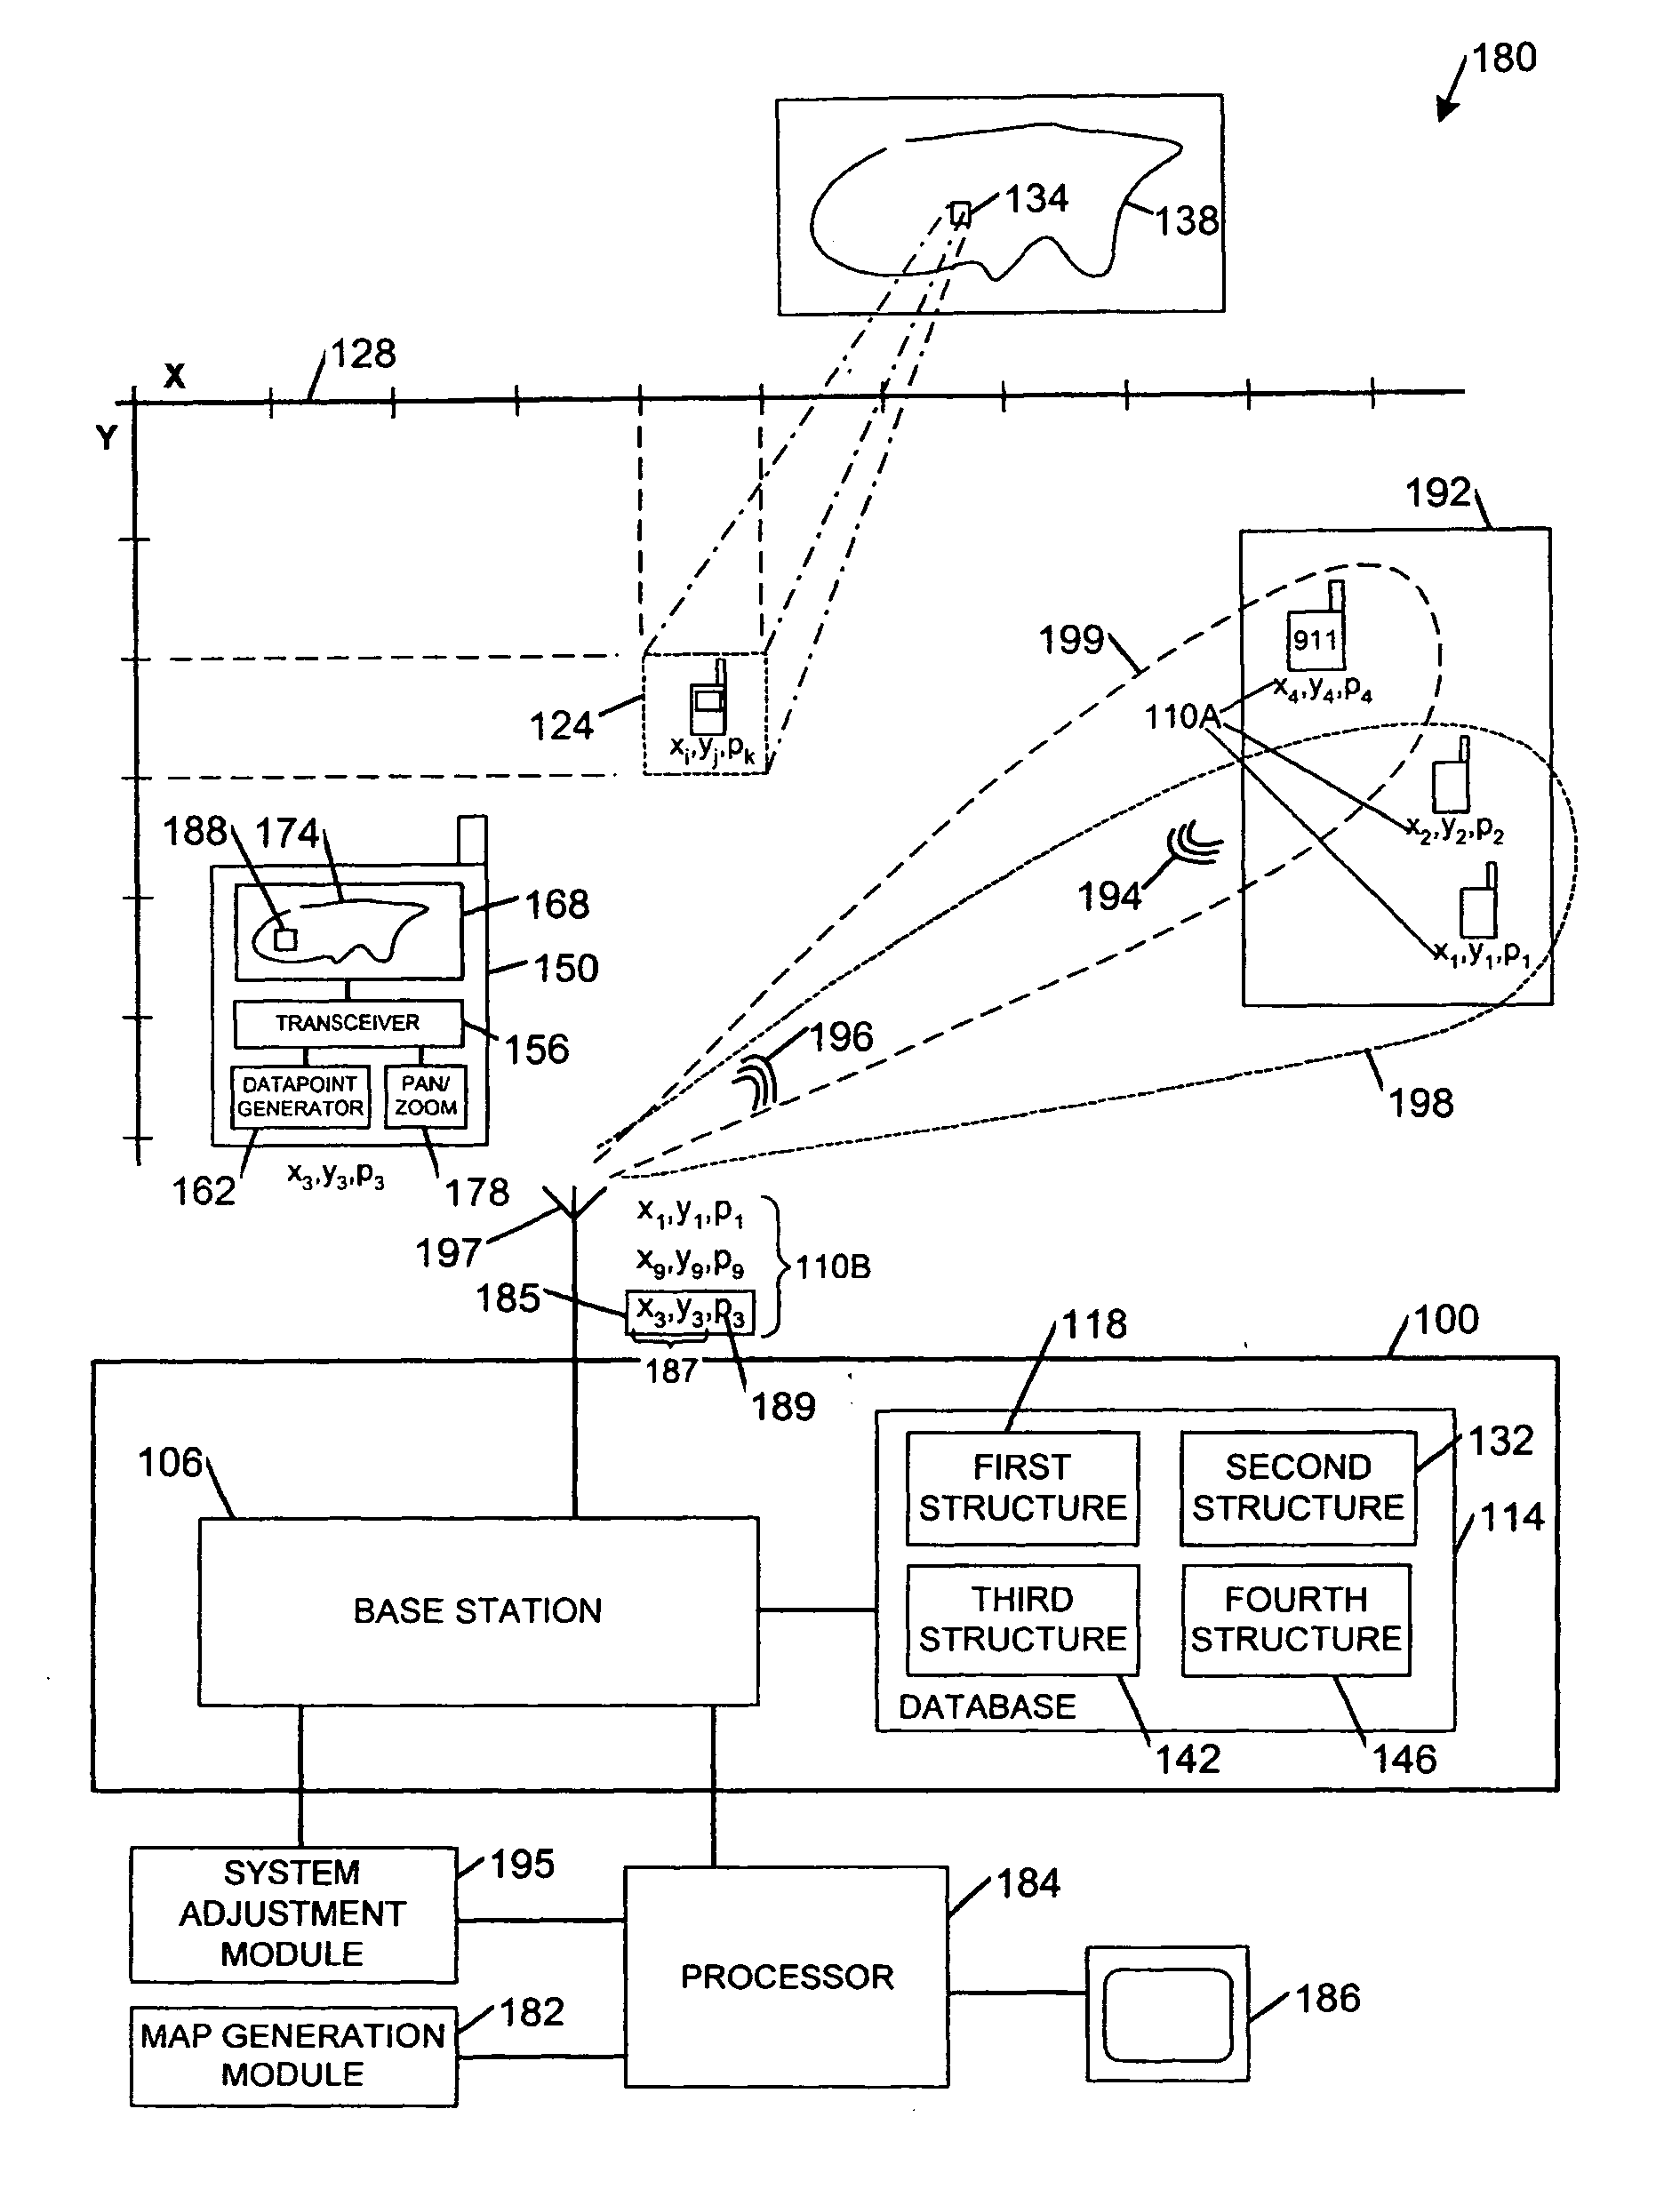 Wireless communication mapping apparatus, systems, and methods